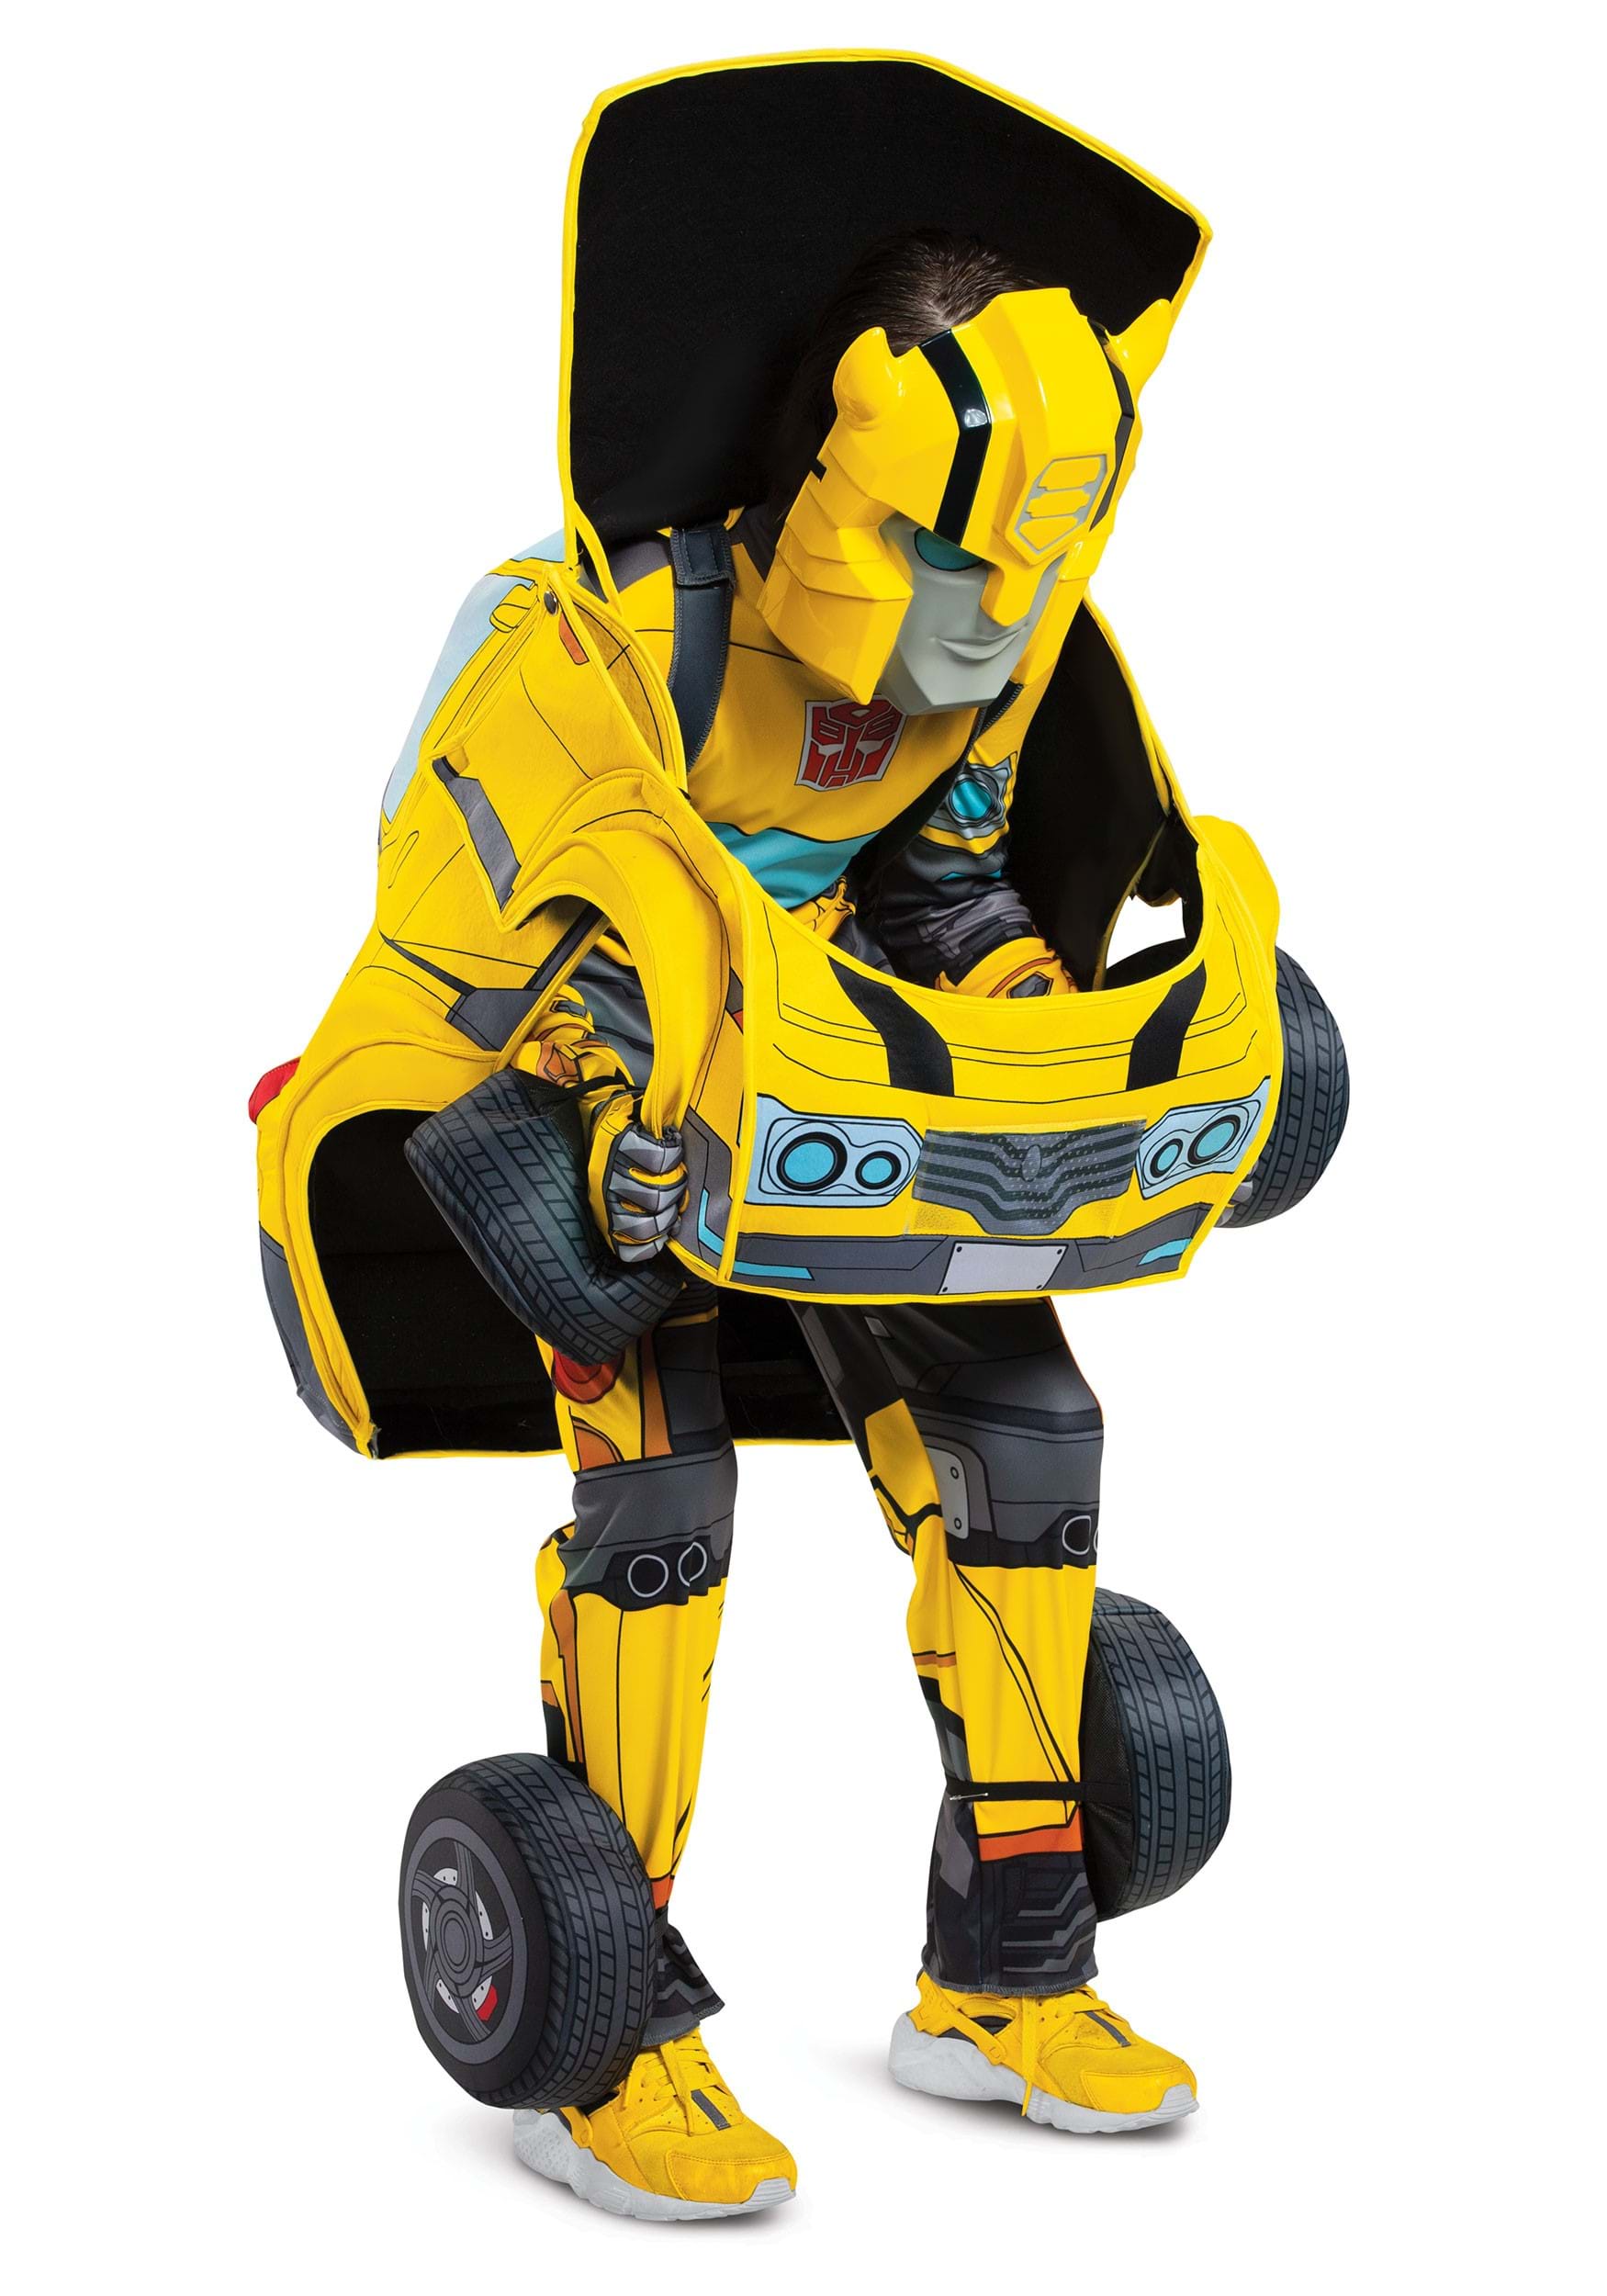 Details about   Boy's Transformers Bumblebee Halloween Costume 2 PC Set Size Large 10-12 